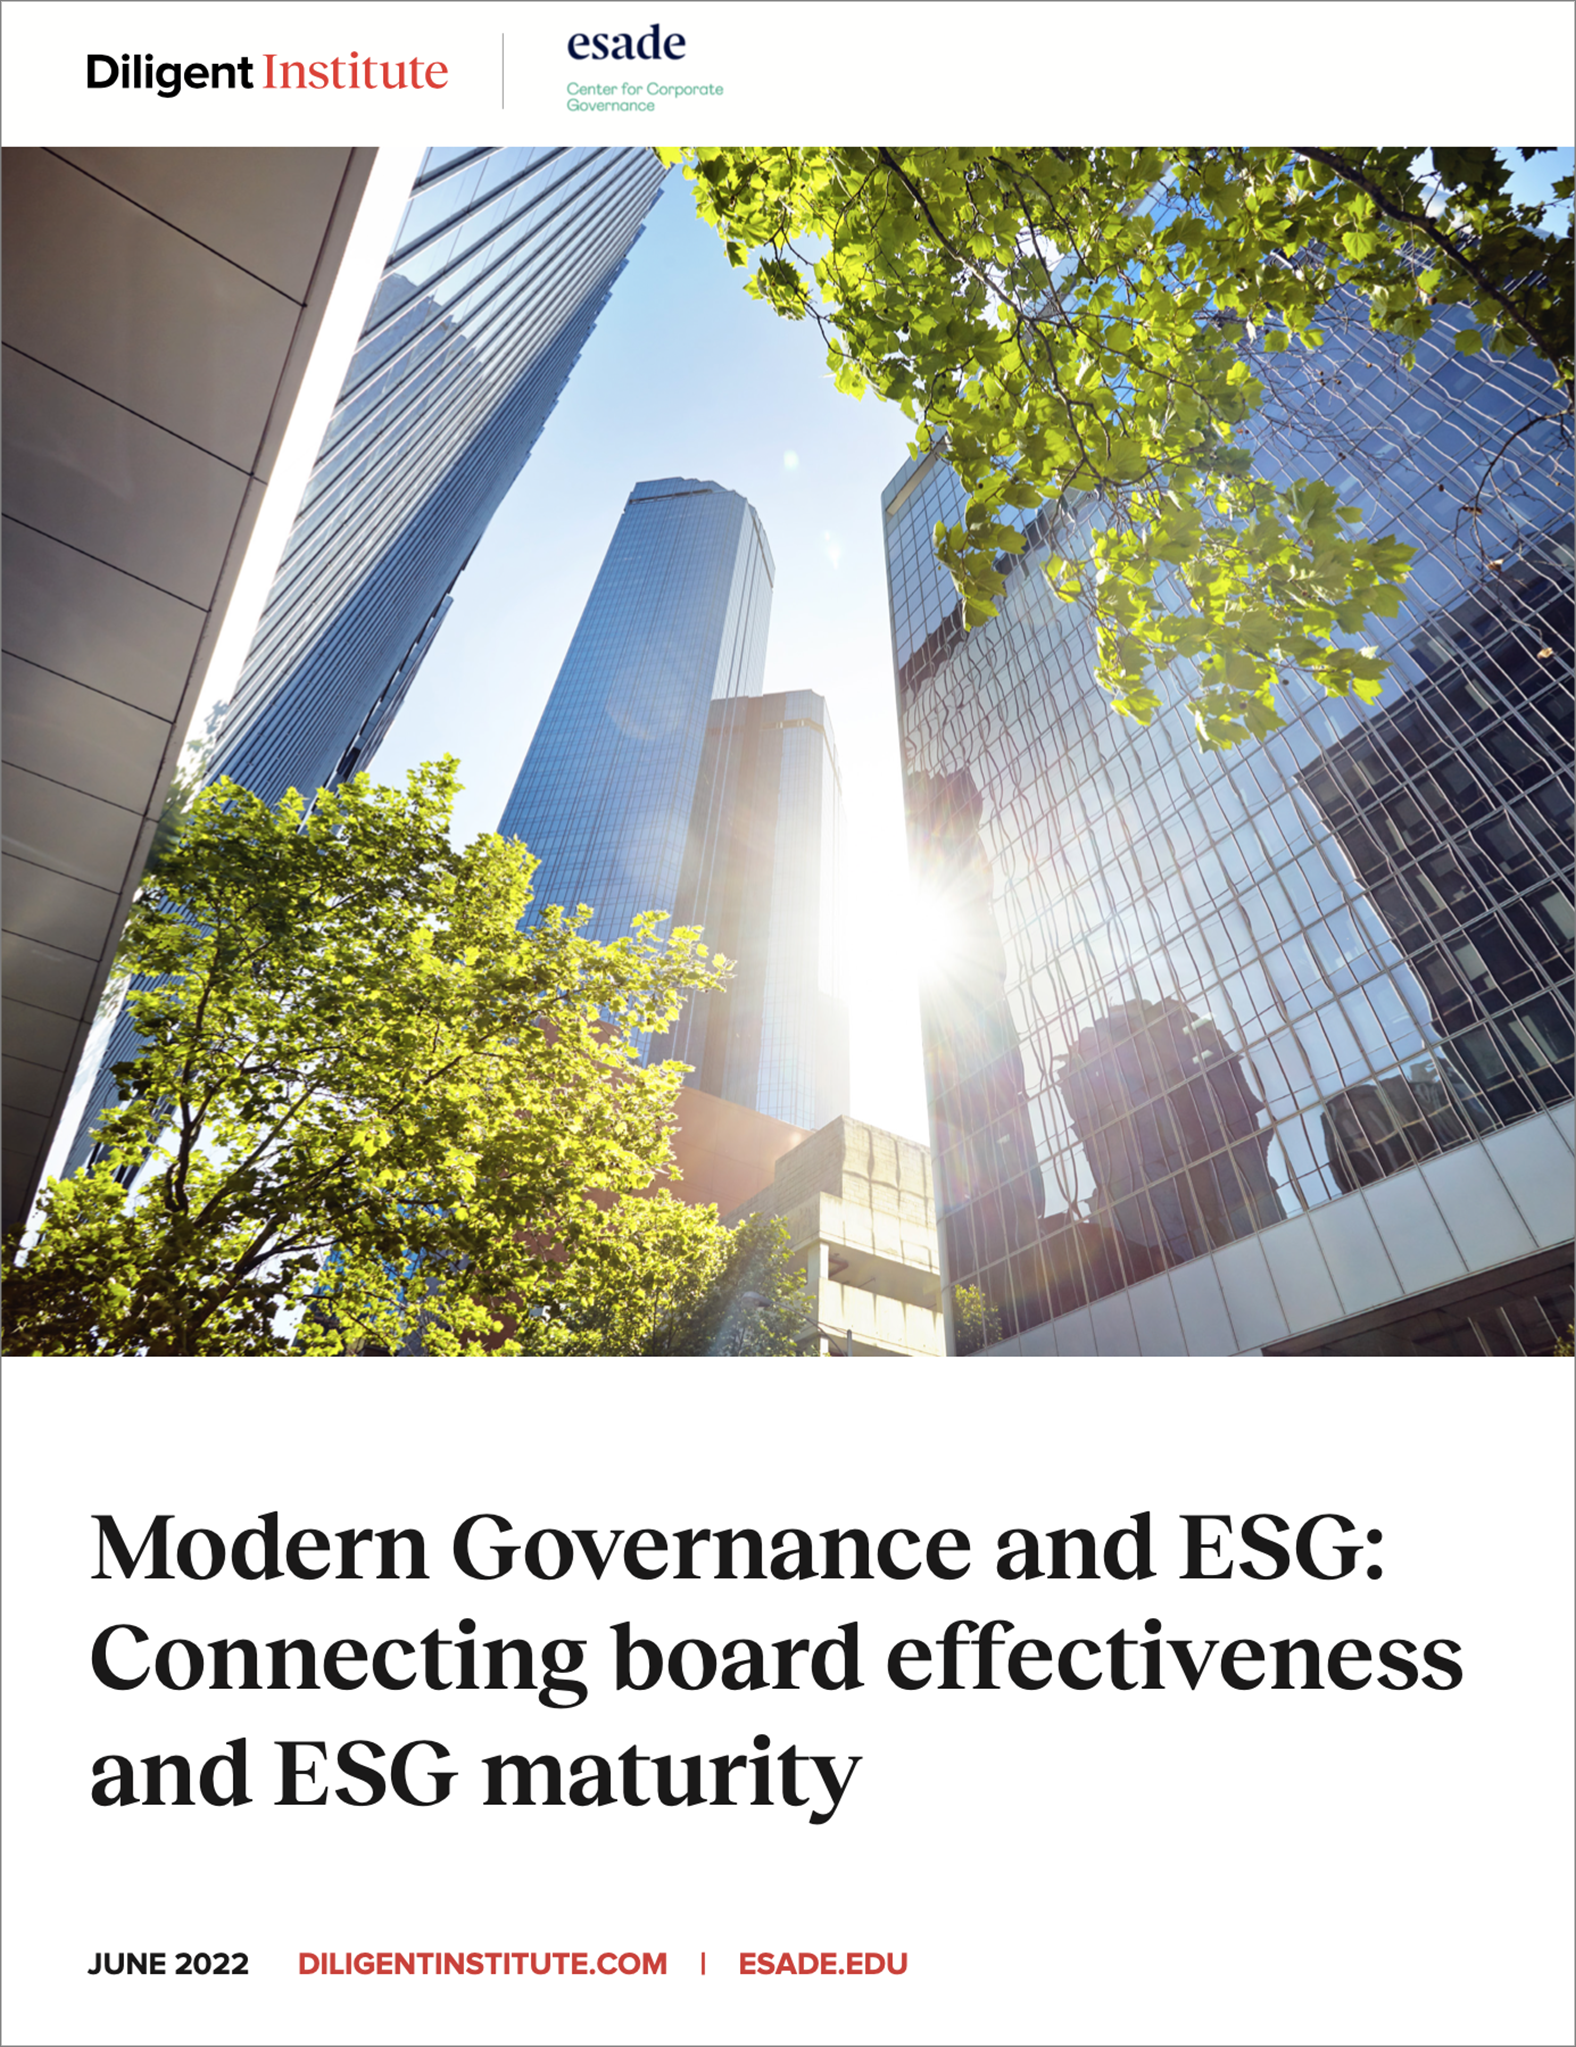 Modern Governance and ESG: Connecting board effectiveness and ESG maturity report